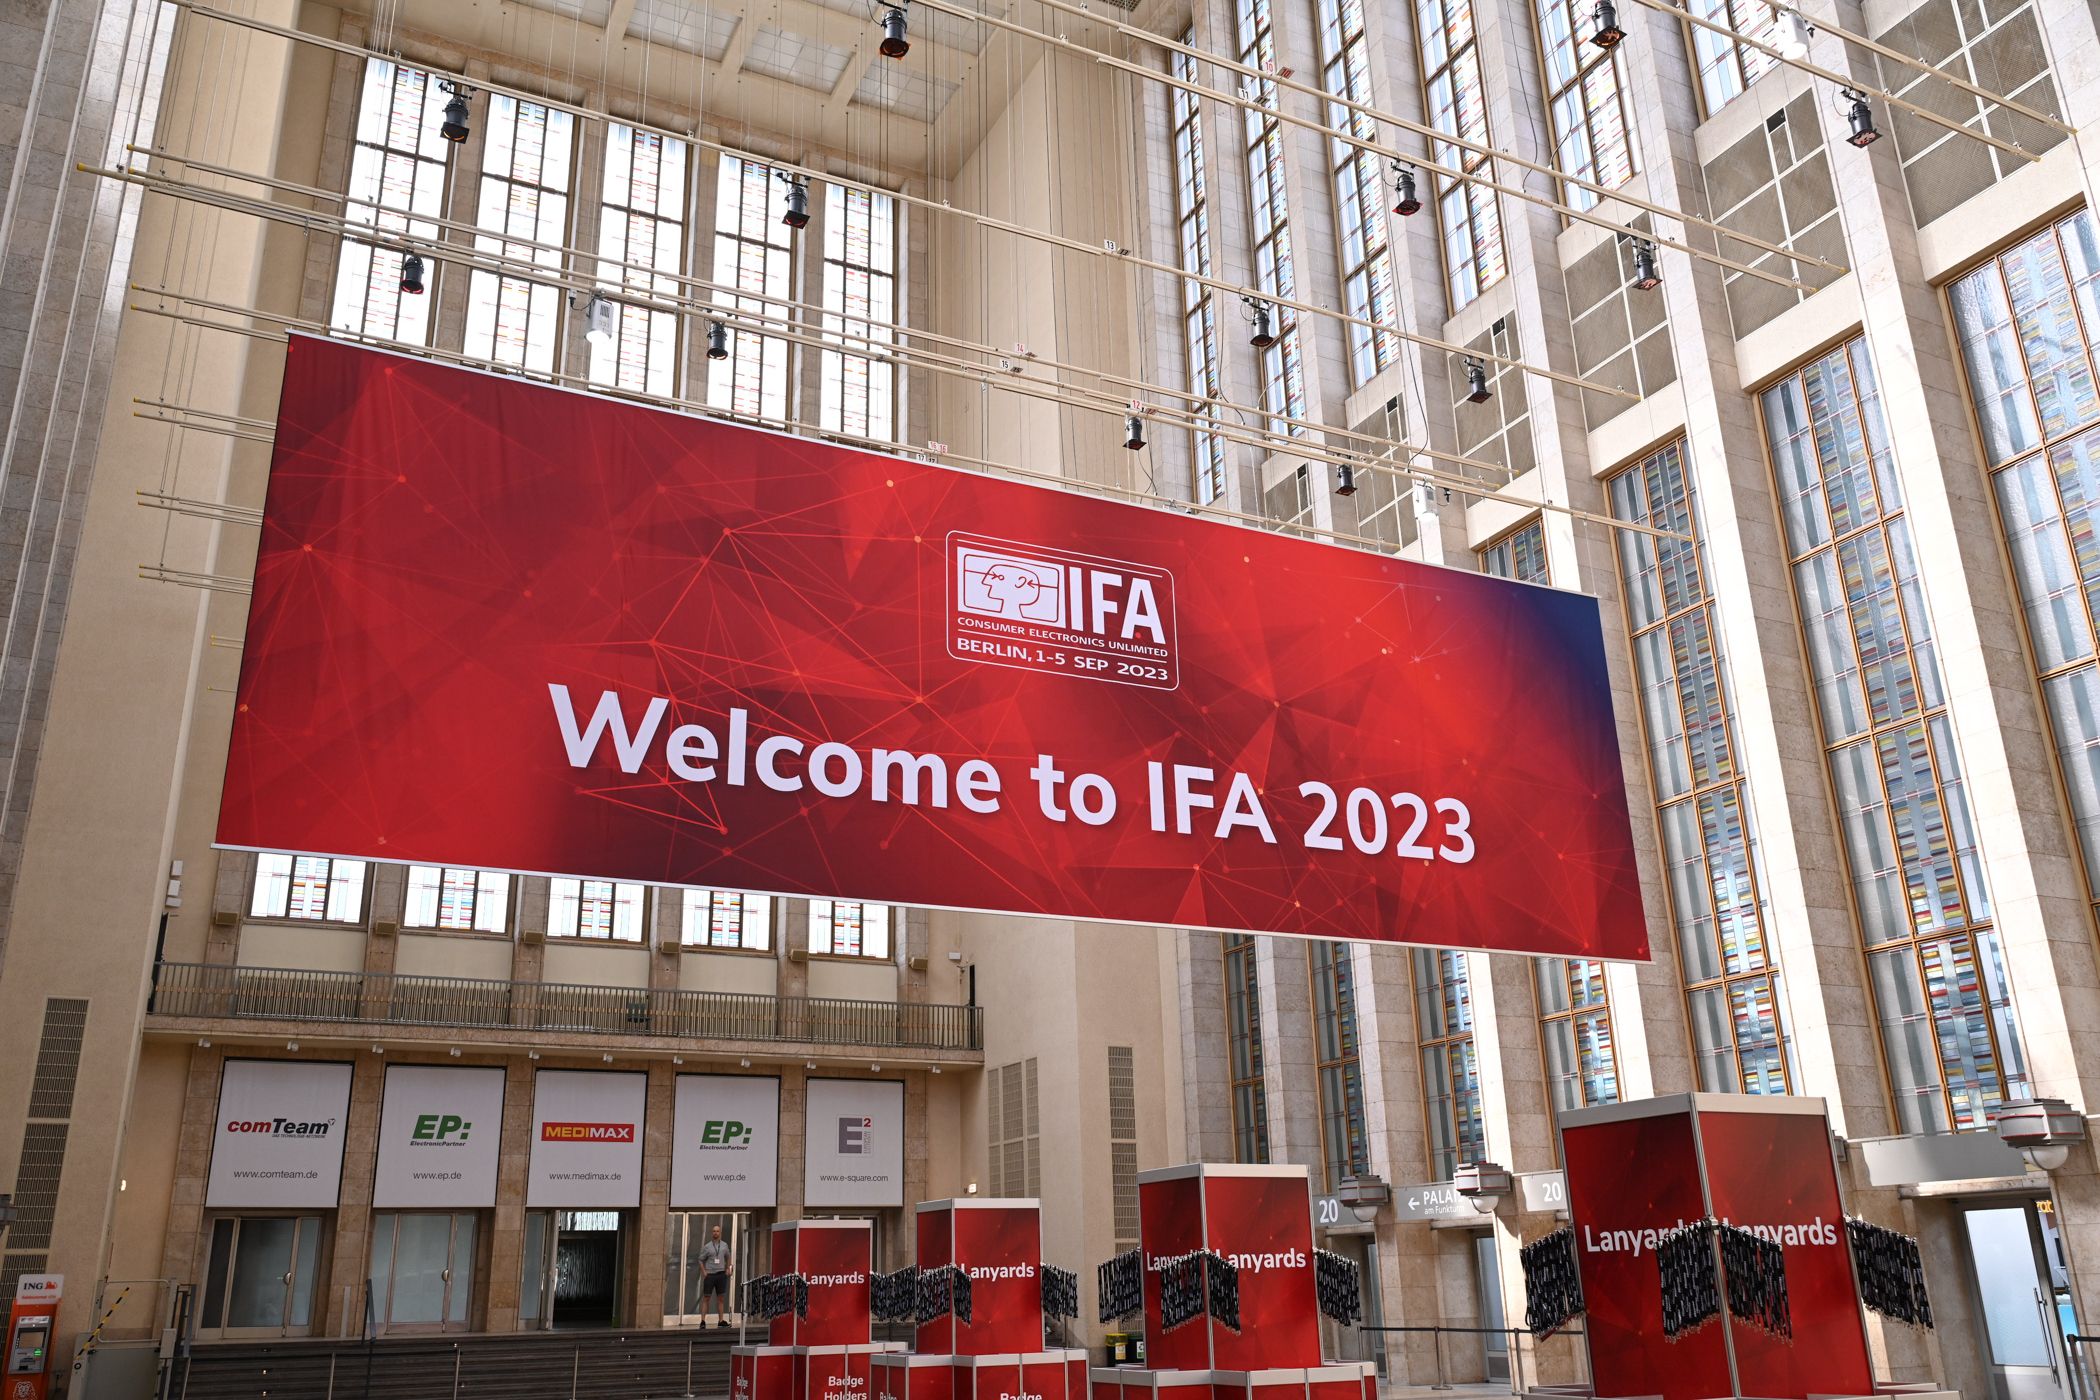 The north entrance of the IFA convention center with a large red banner.